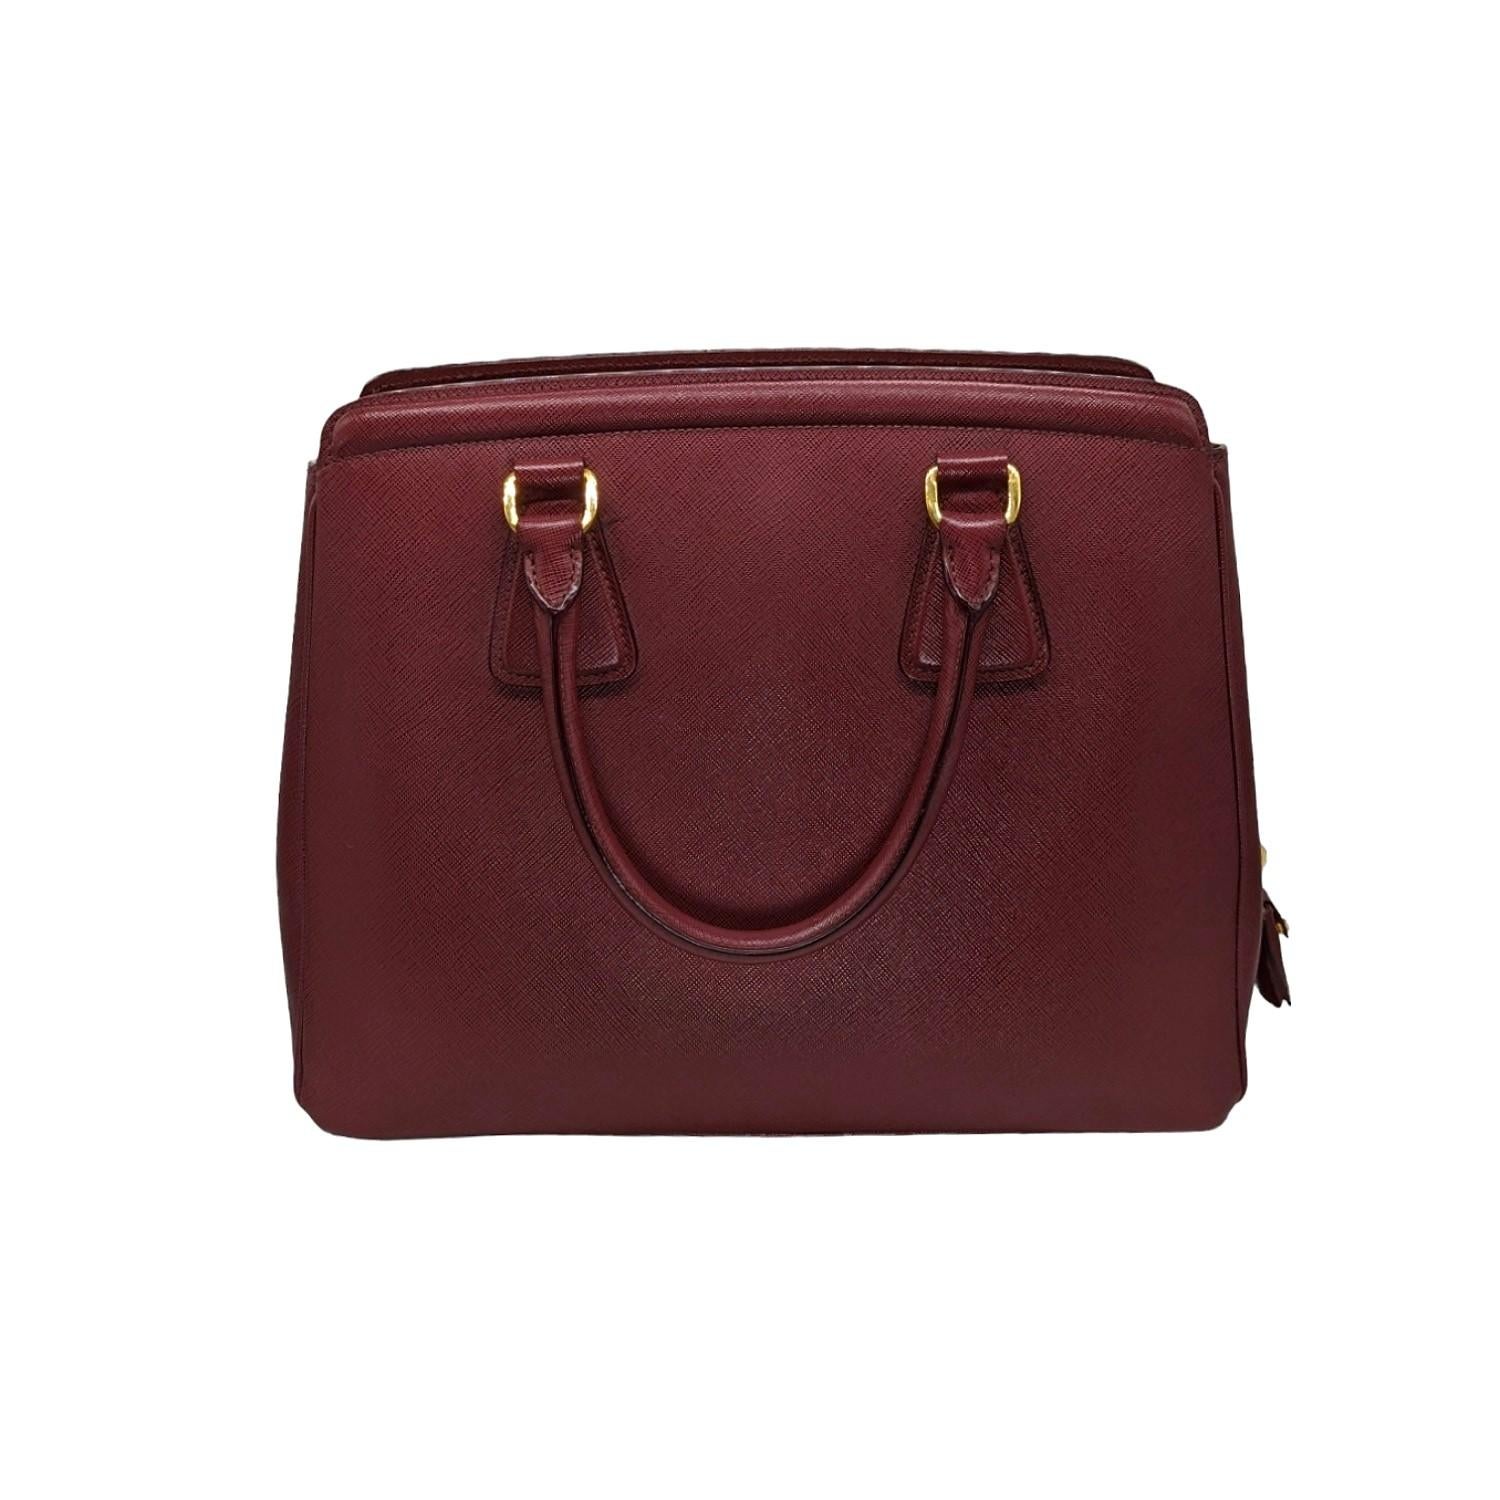 Prada Saffiano Lux Tote in Cerise. This chic tote is crafted of Saffiano cross-grain leather. The tote features rolled leather top handles, polished brass hardware. The top opens to a matching fabric interior with plenty compartments, zipper and